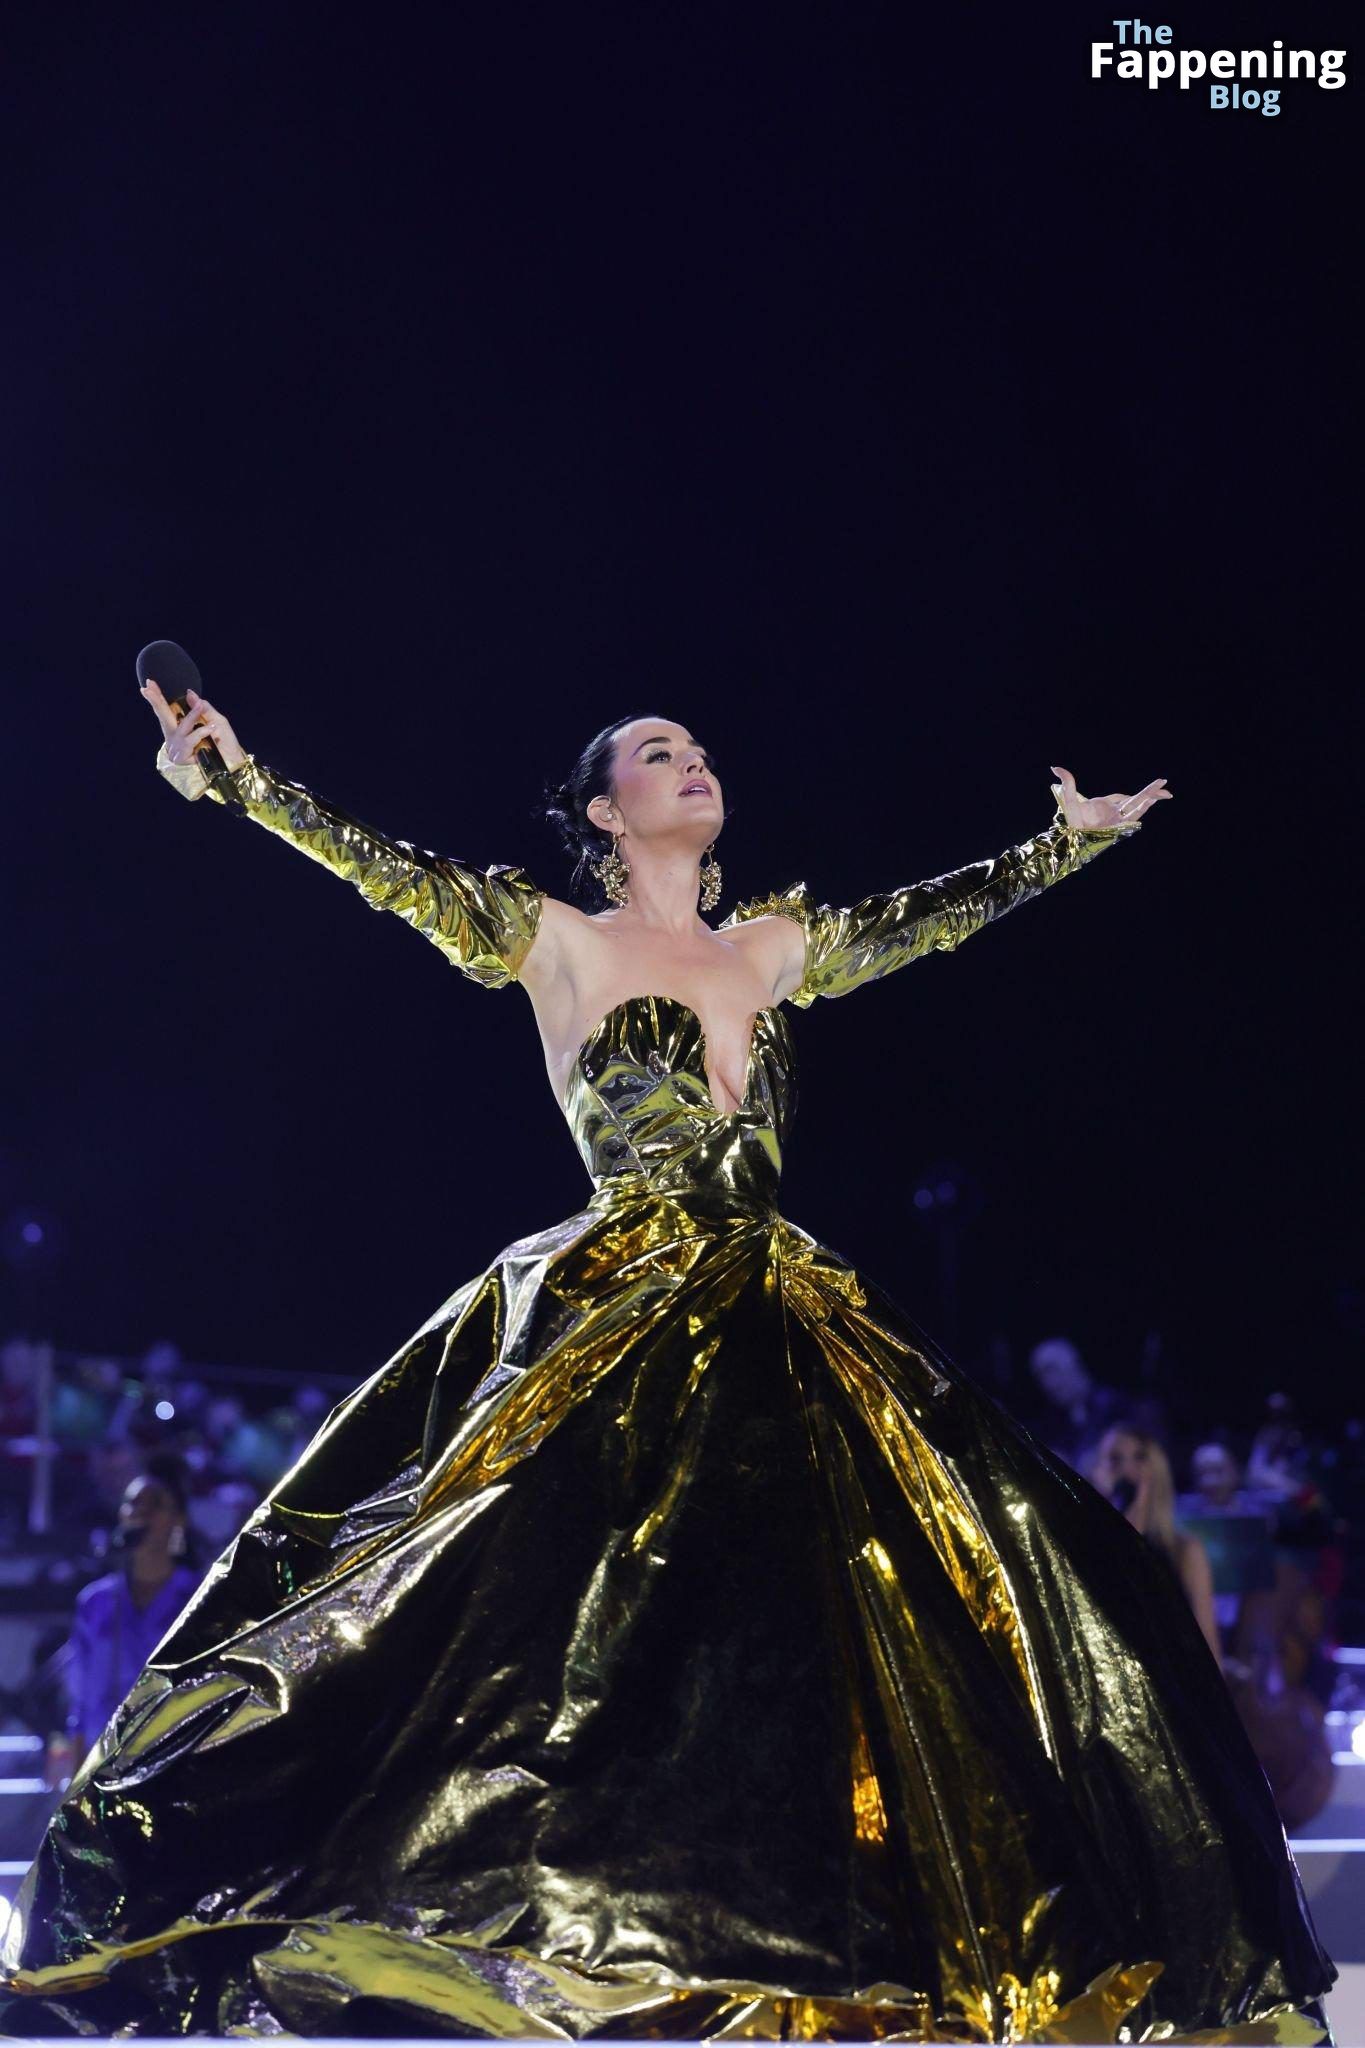 katy-perry-braless-boobs-cleavage-coronation-concert-windsor-8-thefappeningblog.com_.jpg